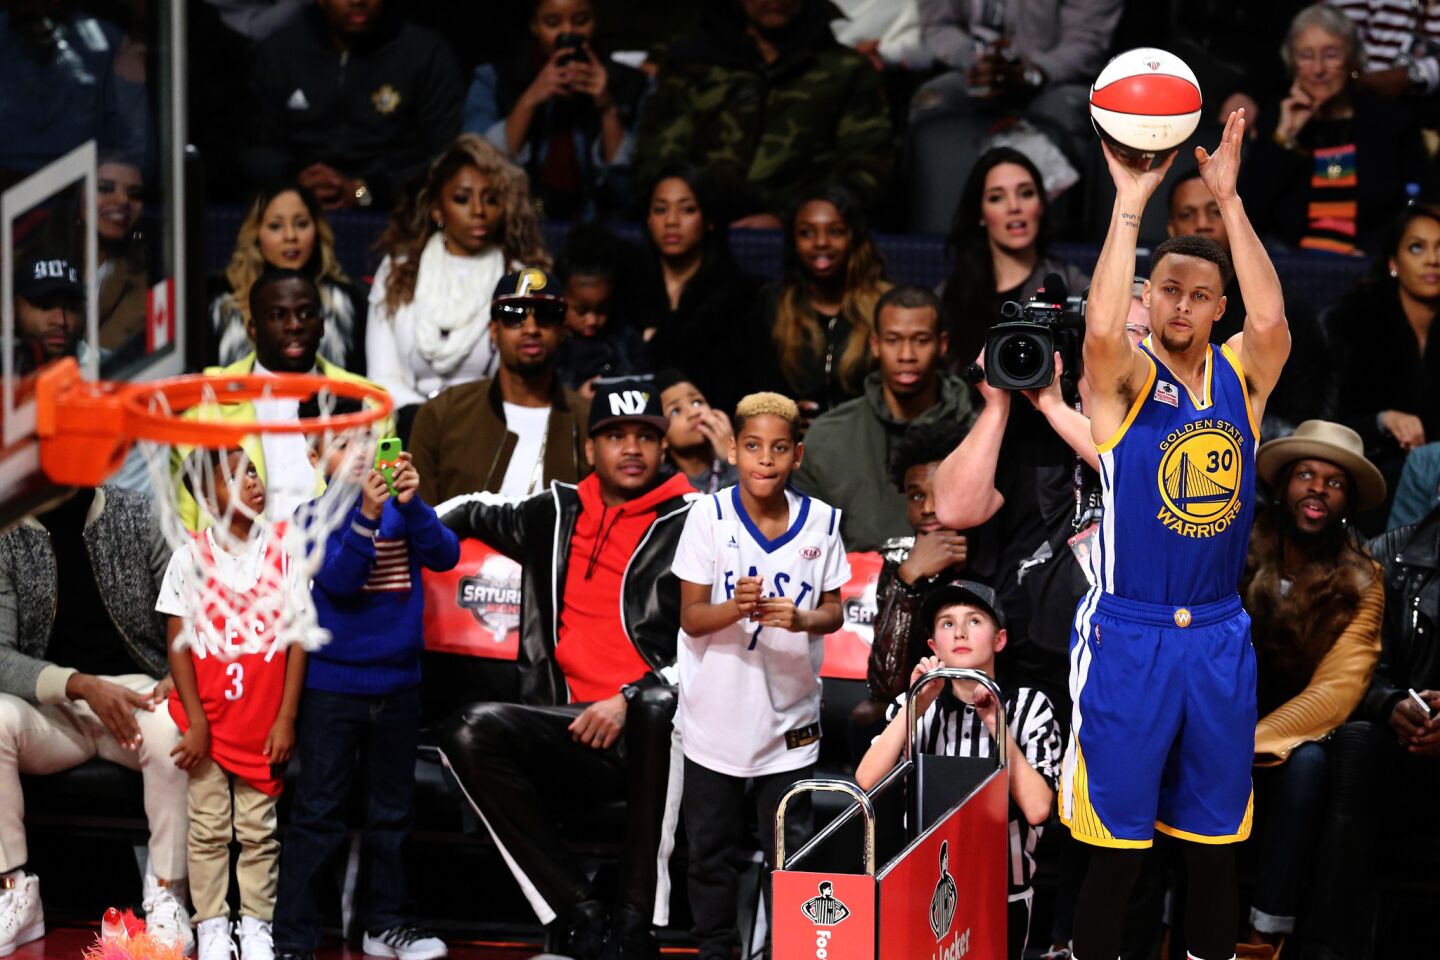 Warriors point guard Stephen Curry takes a shot during the Three-Point Contest on Saturday. The defending champion would be beaten by teammate Klay Thompson.